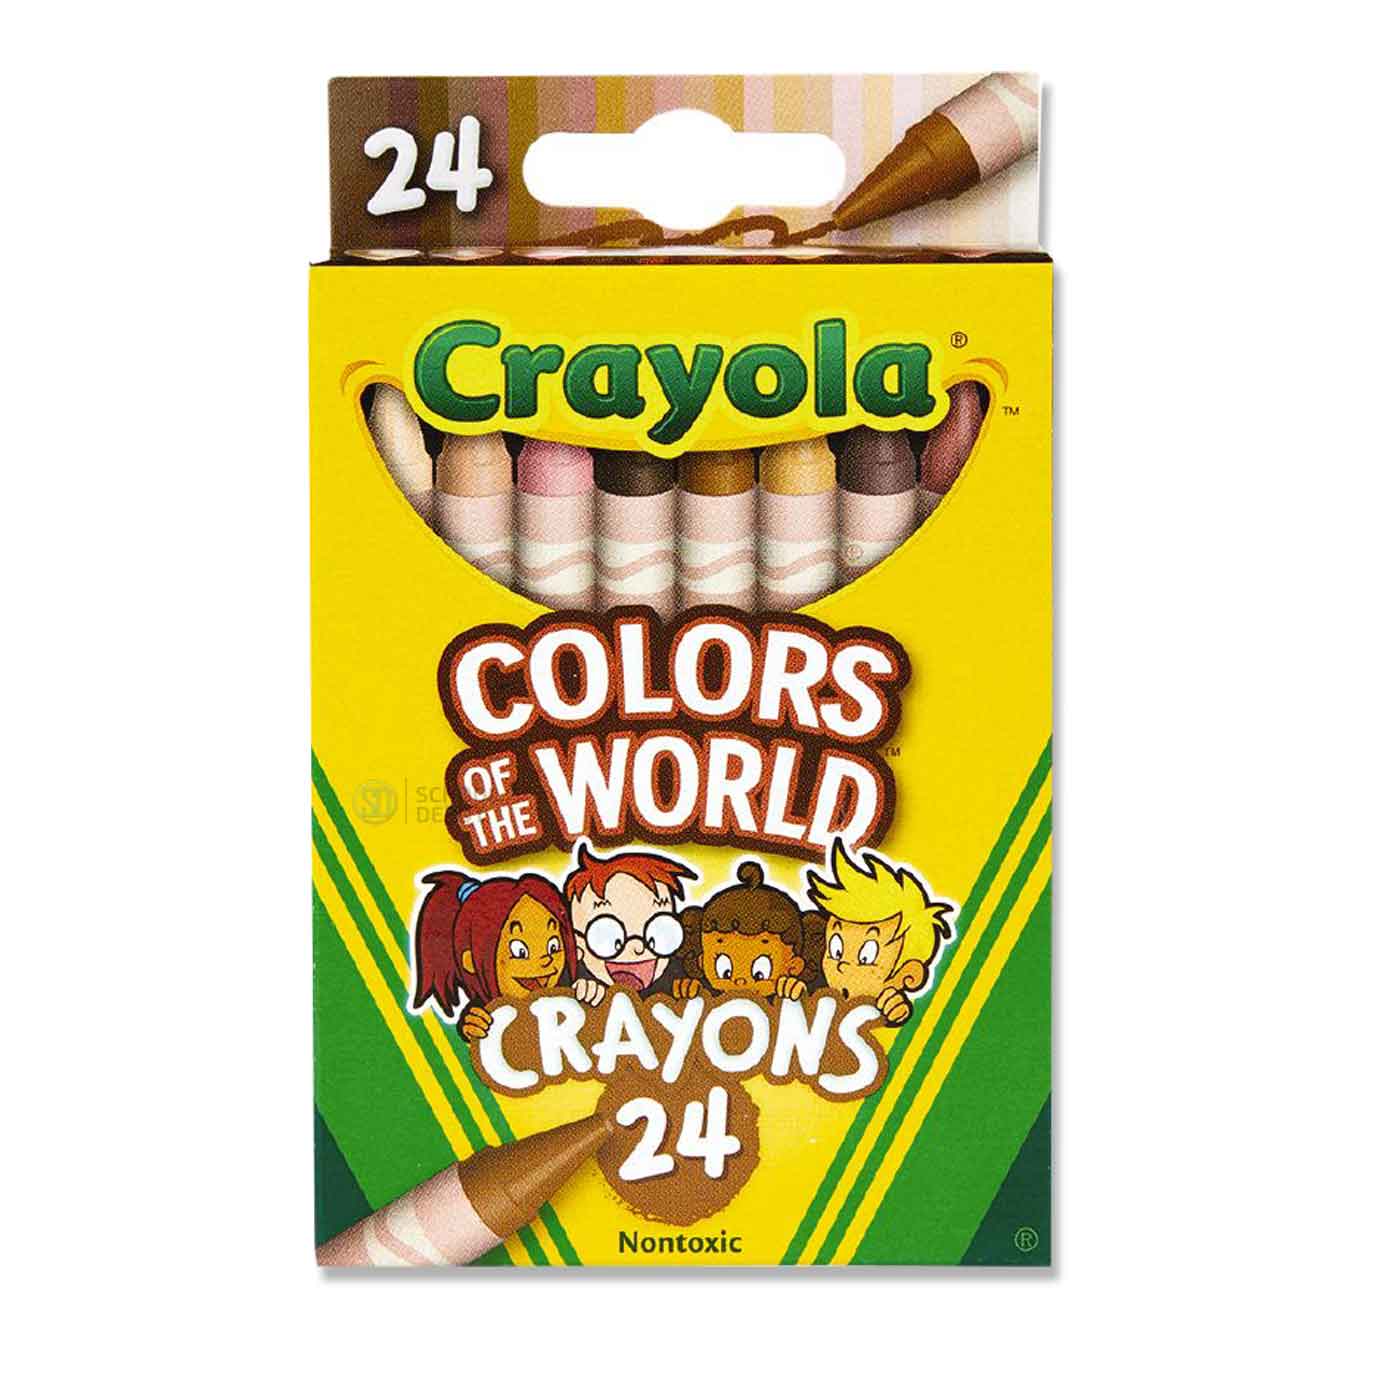 Crayola Crayons Colours of the World Pack of 24